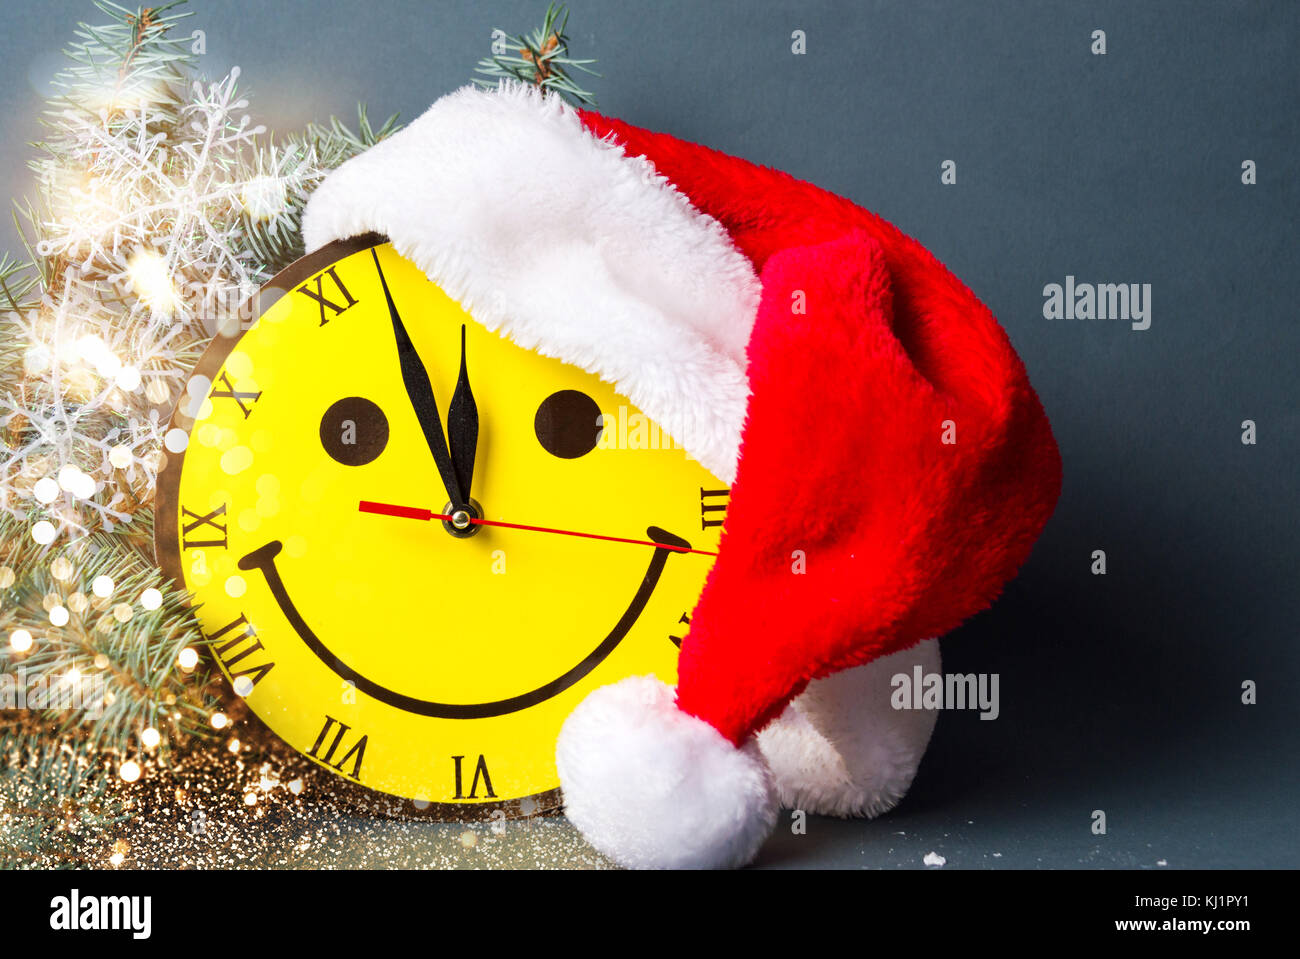 Smiley face clock and Sand hat with Christmas decorations Stock Photo